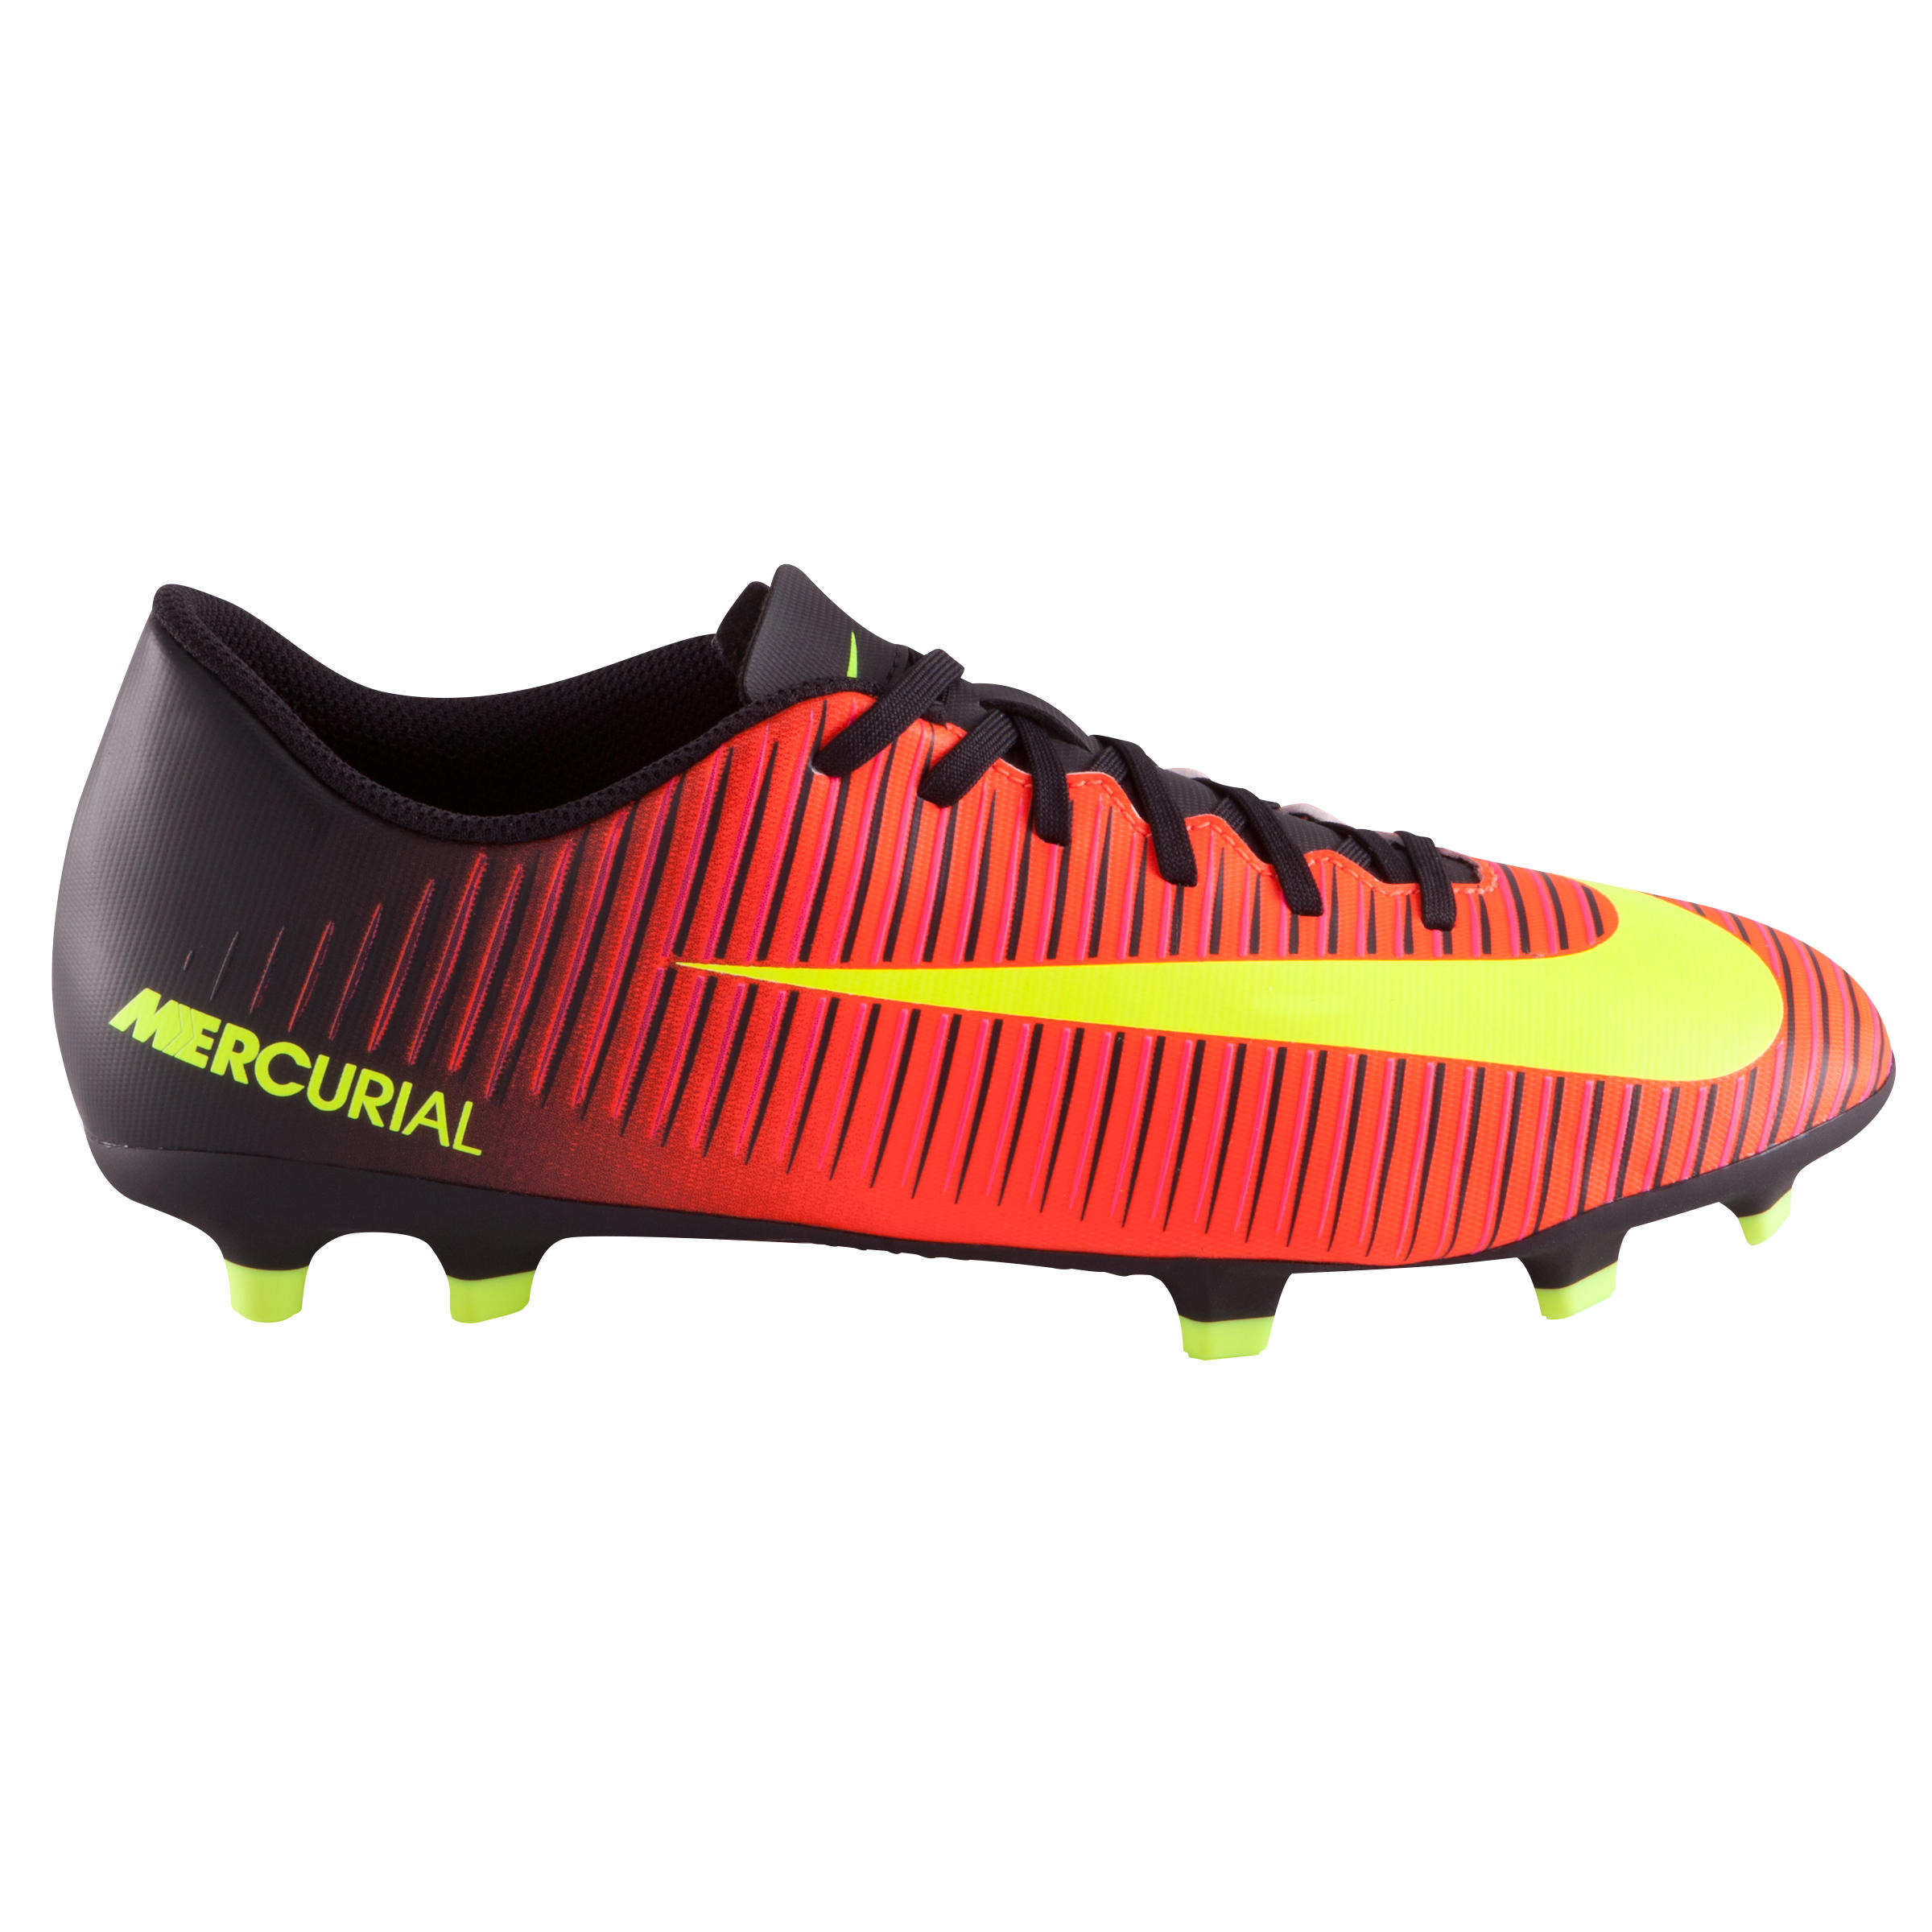 NIKE Mercurial Vortex Euro FG Adult Football Boots - Red